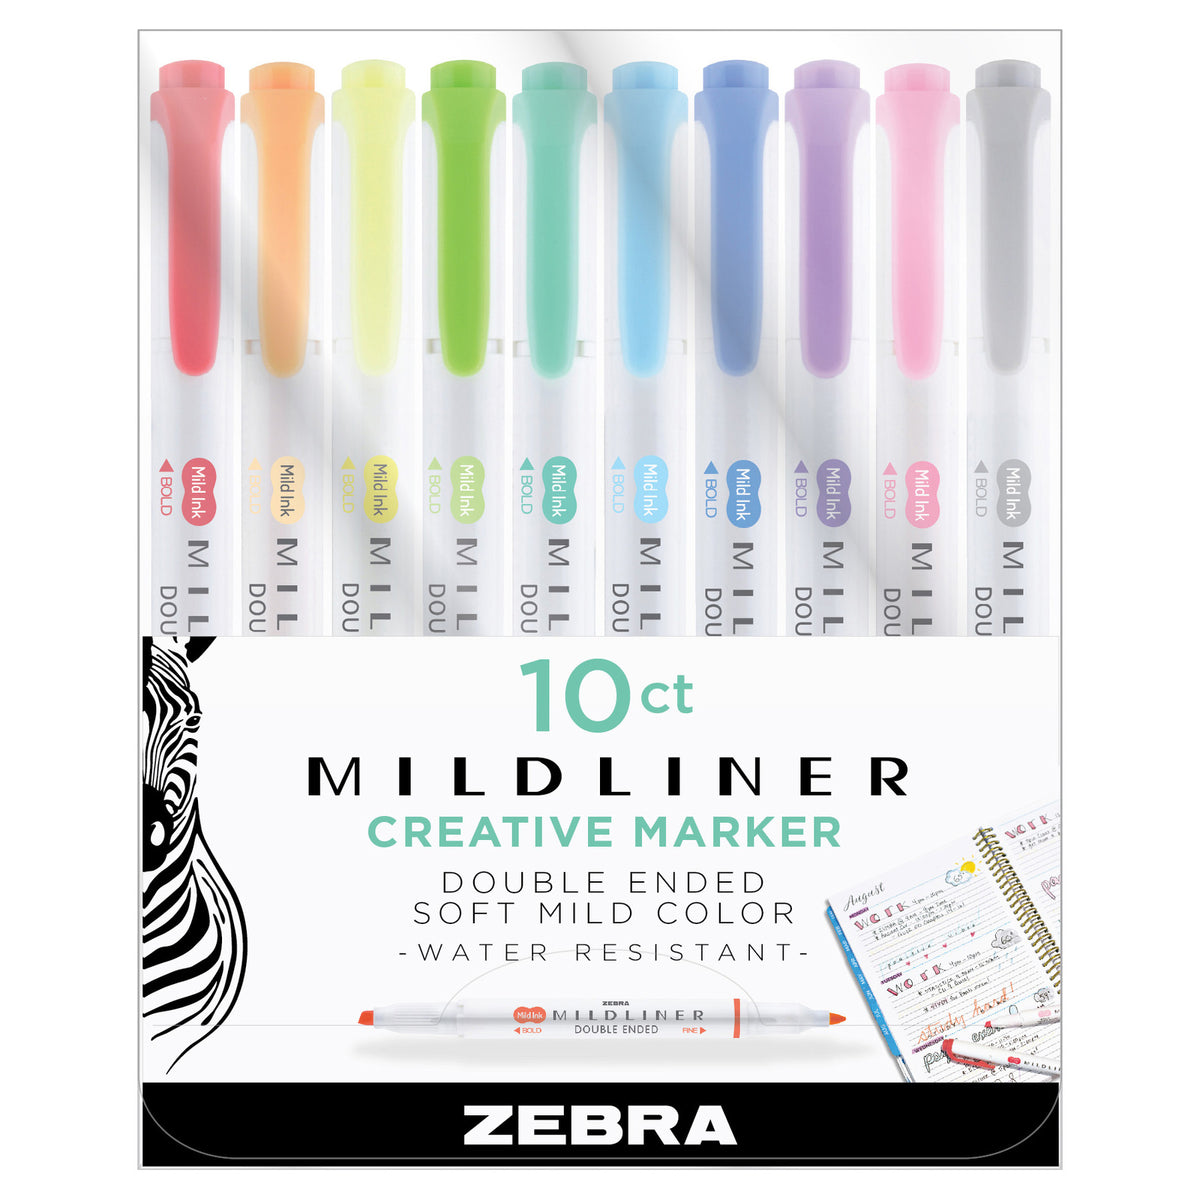 Zebra Midliner Double Ended Pen Set Zebra Sale Online , order now also can  get an unexpected gift